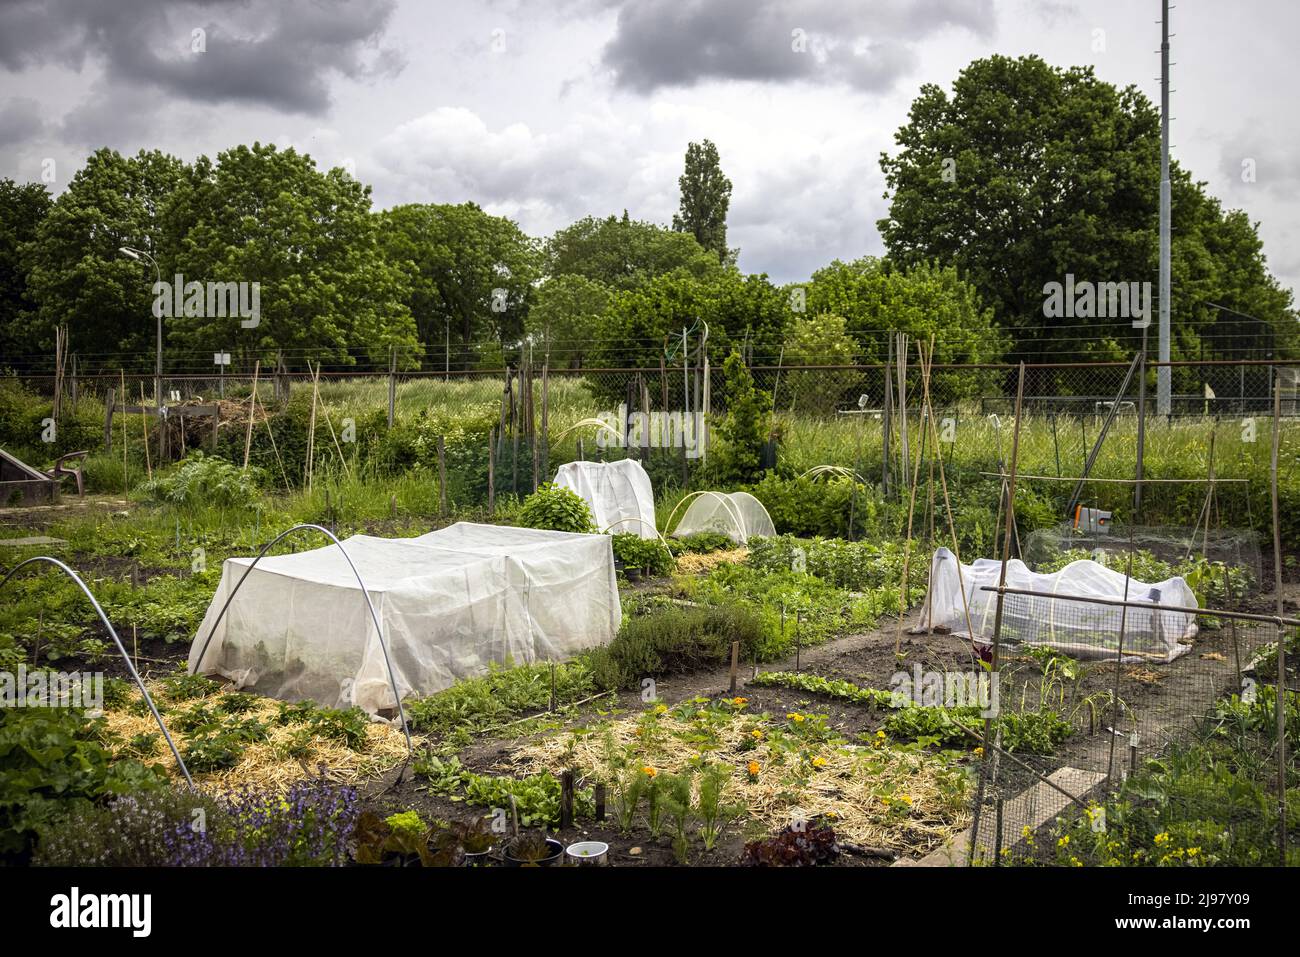 2022-05-21 12:25:17 UTRECHT - People grow their own vegetables in their vegetable garden on a plot of land at the Koningshof urban agriculture initiative. ANP RAMON VAN FLYMEN netherlands out - belgium out Stock Photo